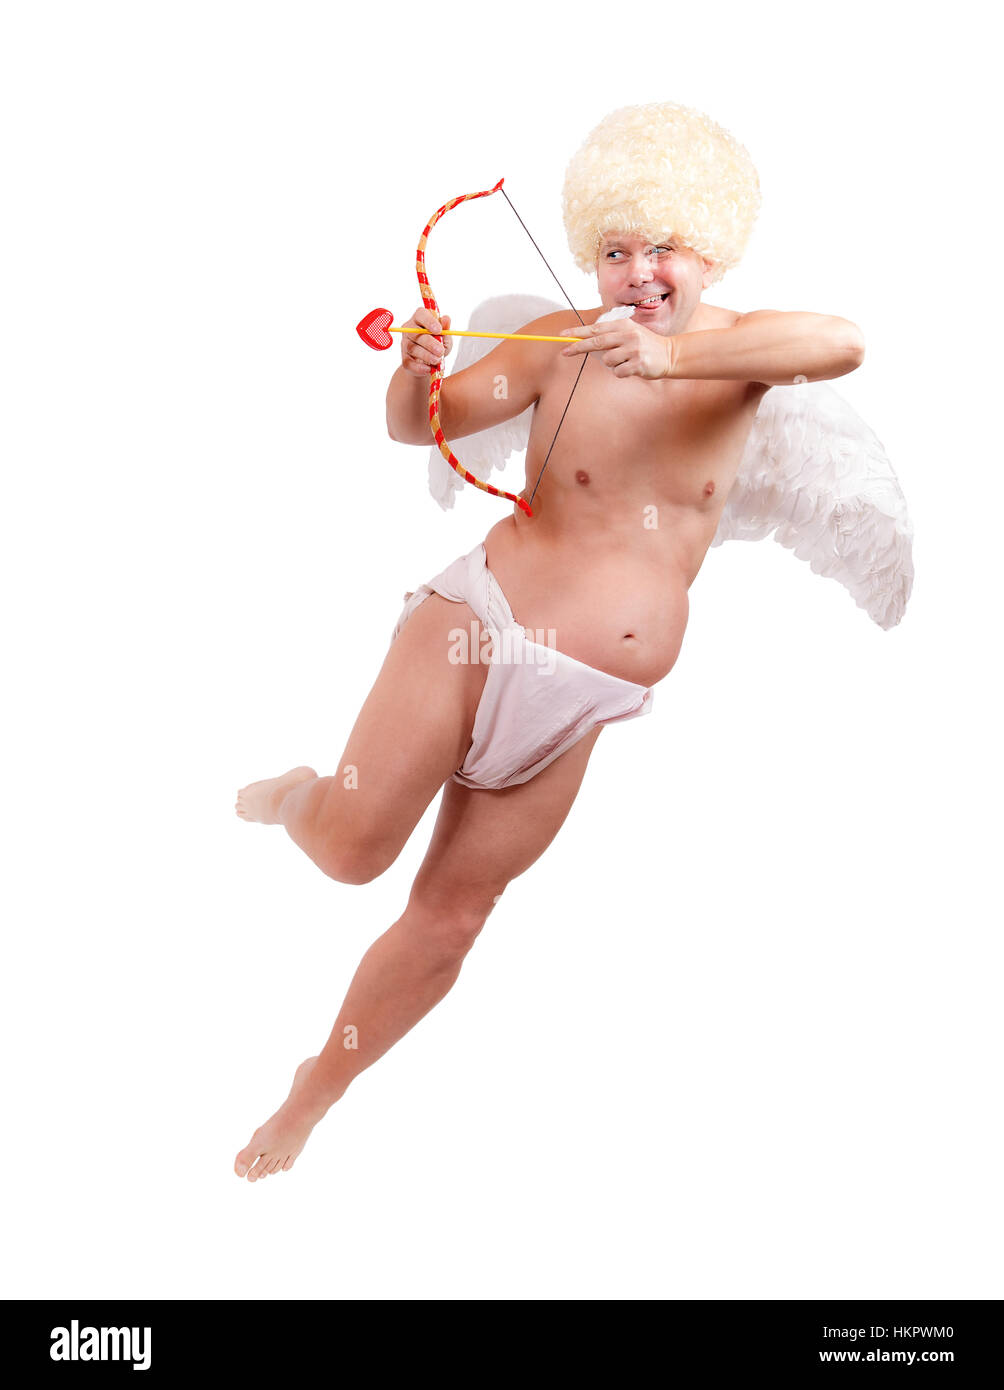 Funny angel with arrow flying isolated on white background Stock Photo